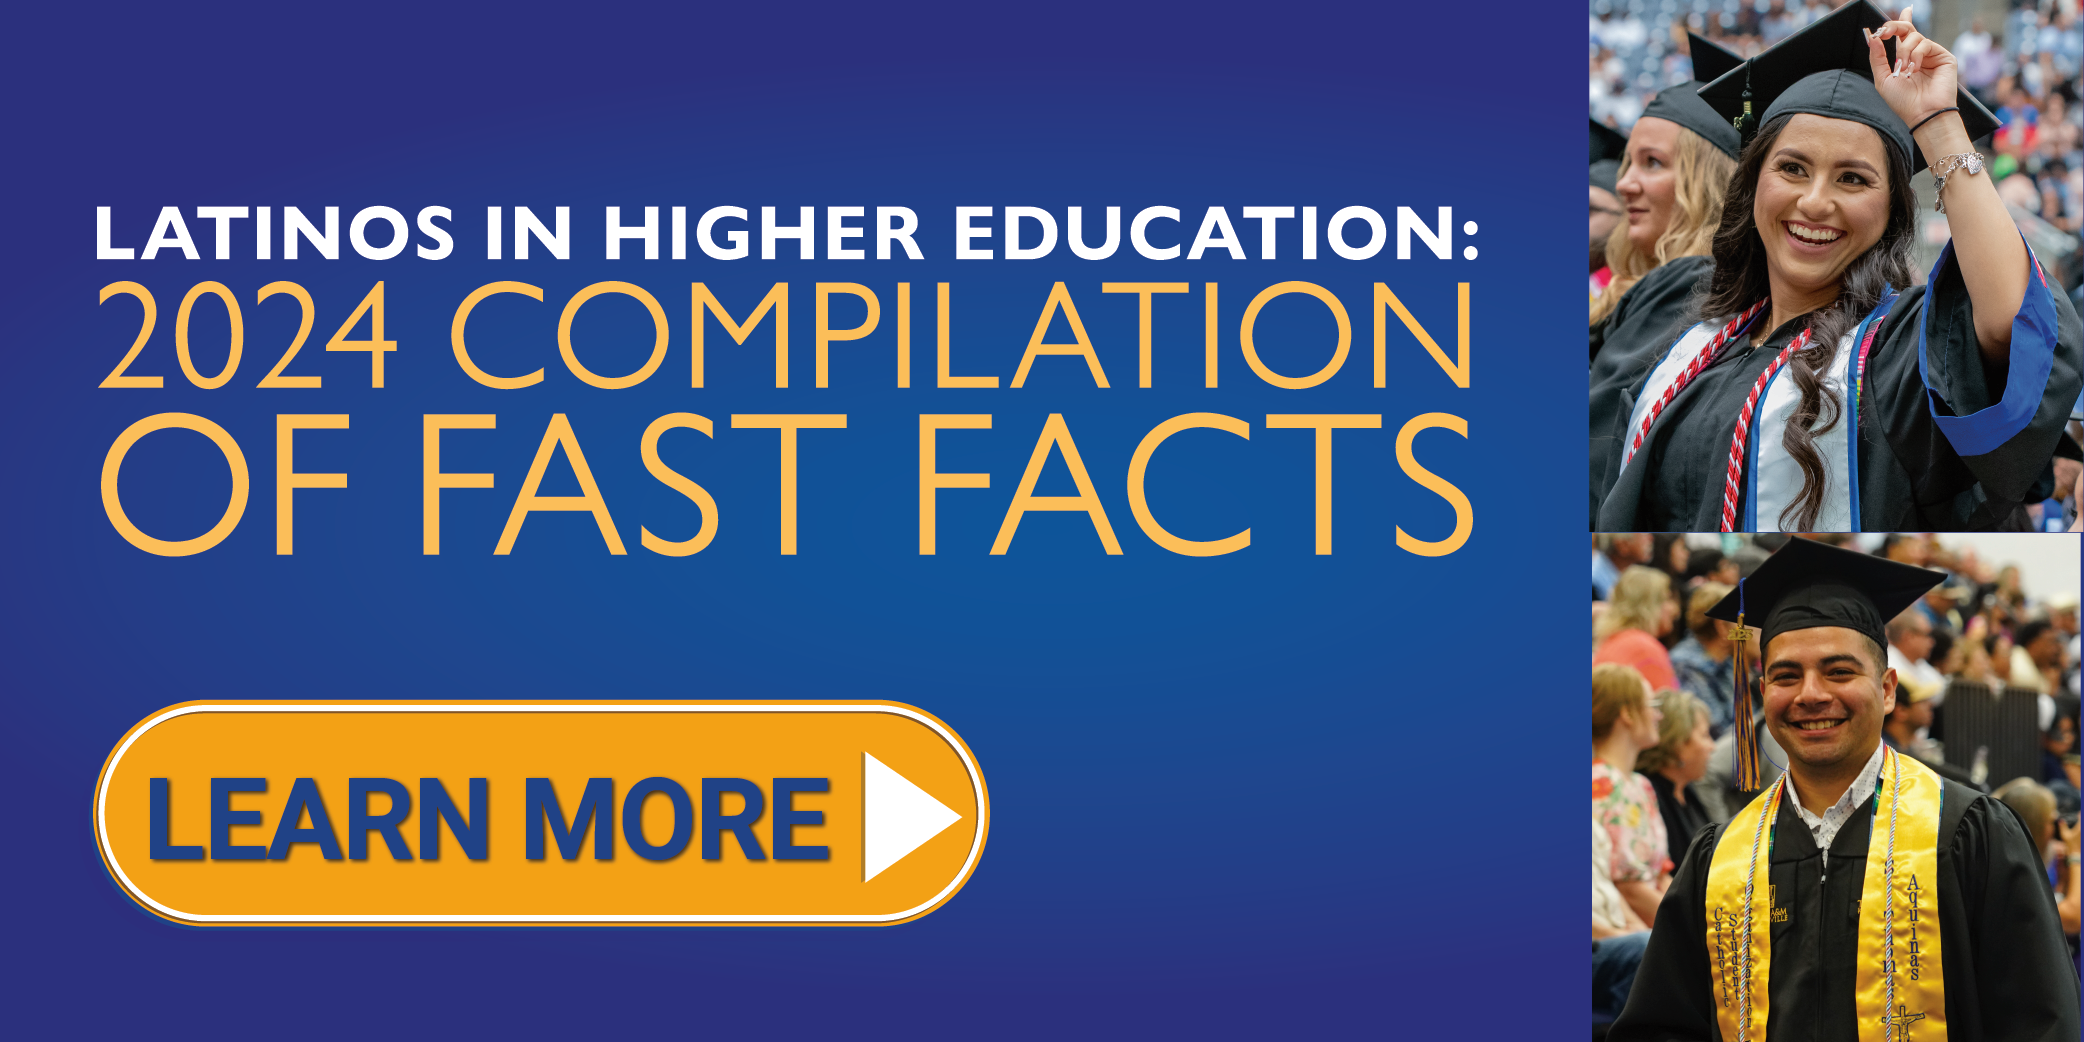 Latinos in Higher Education - 2024 Compilation of Fast Facts - web pop-up banner with "Learn More" button.